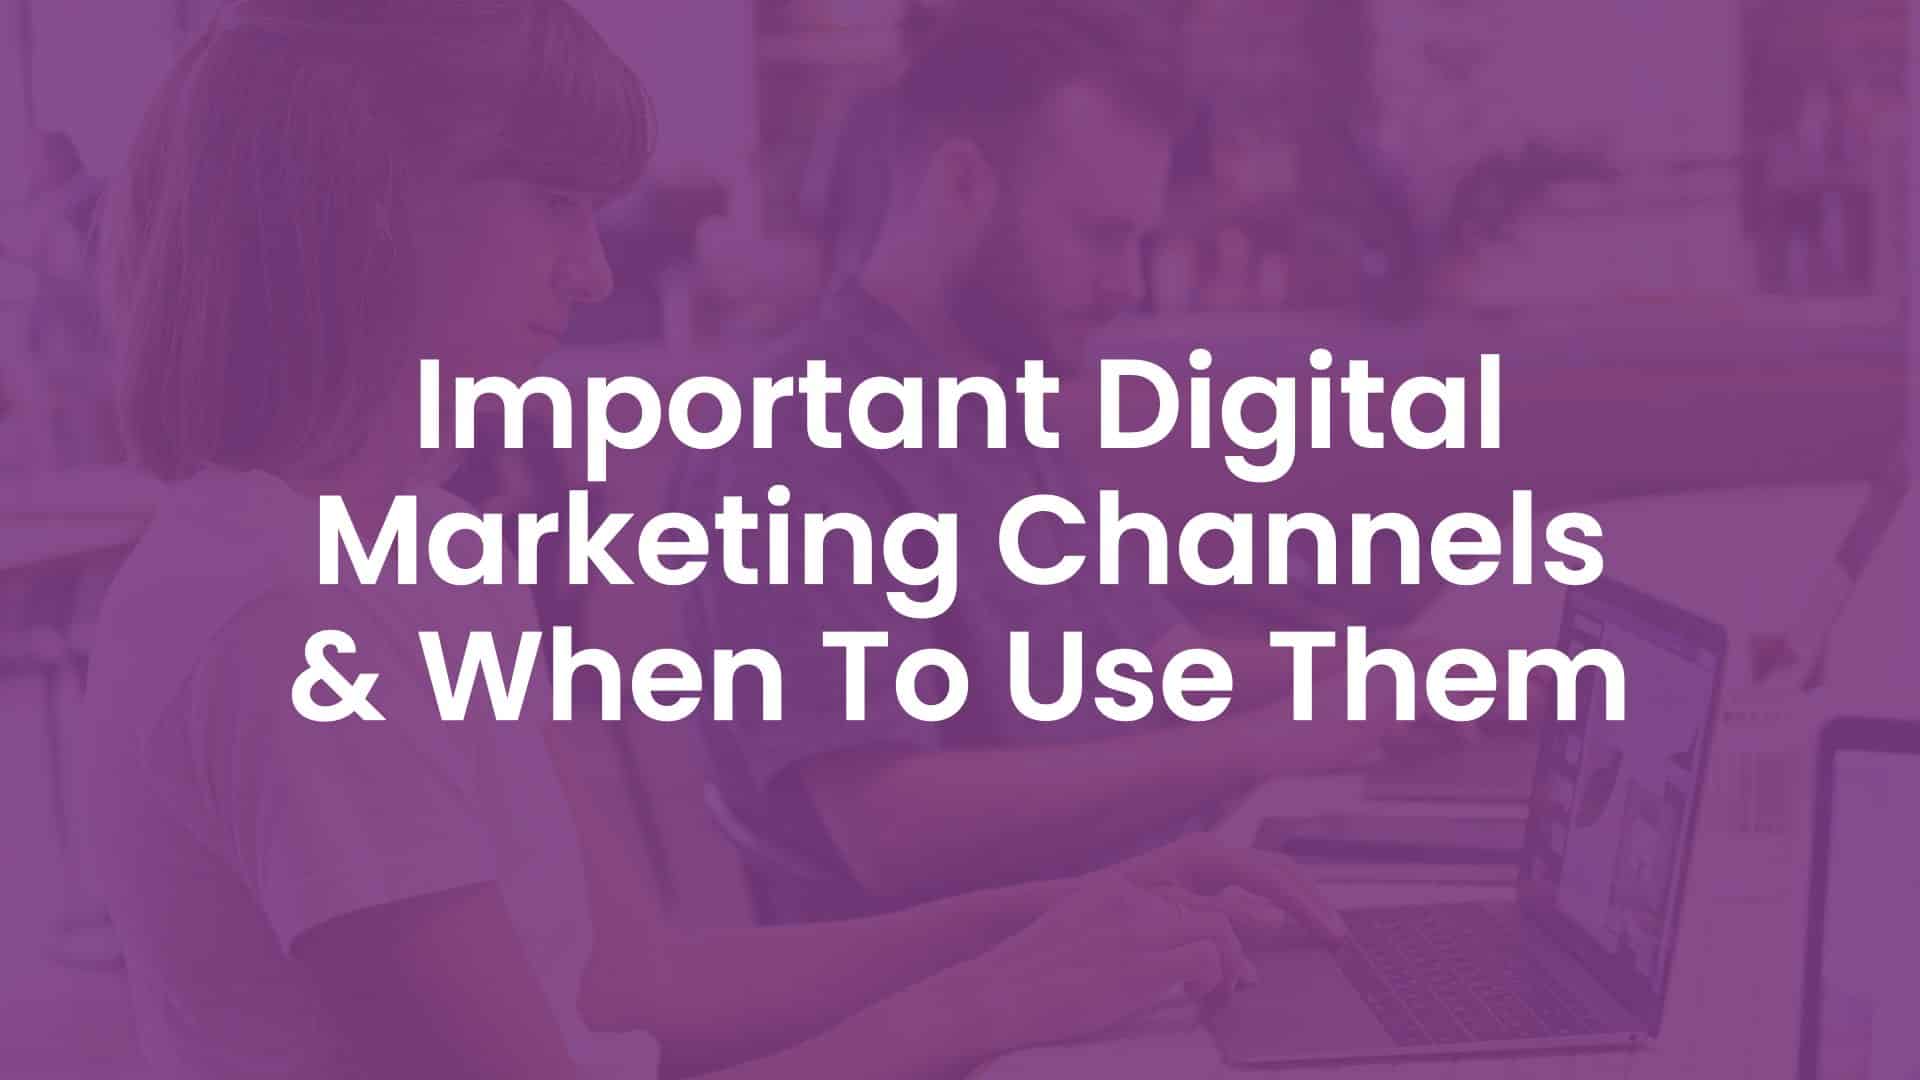 Important Digital Marketing Channels & When to Use Them